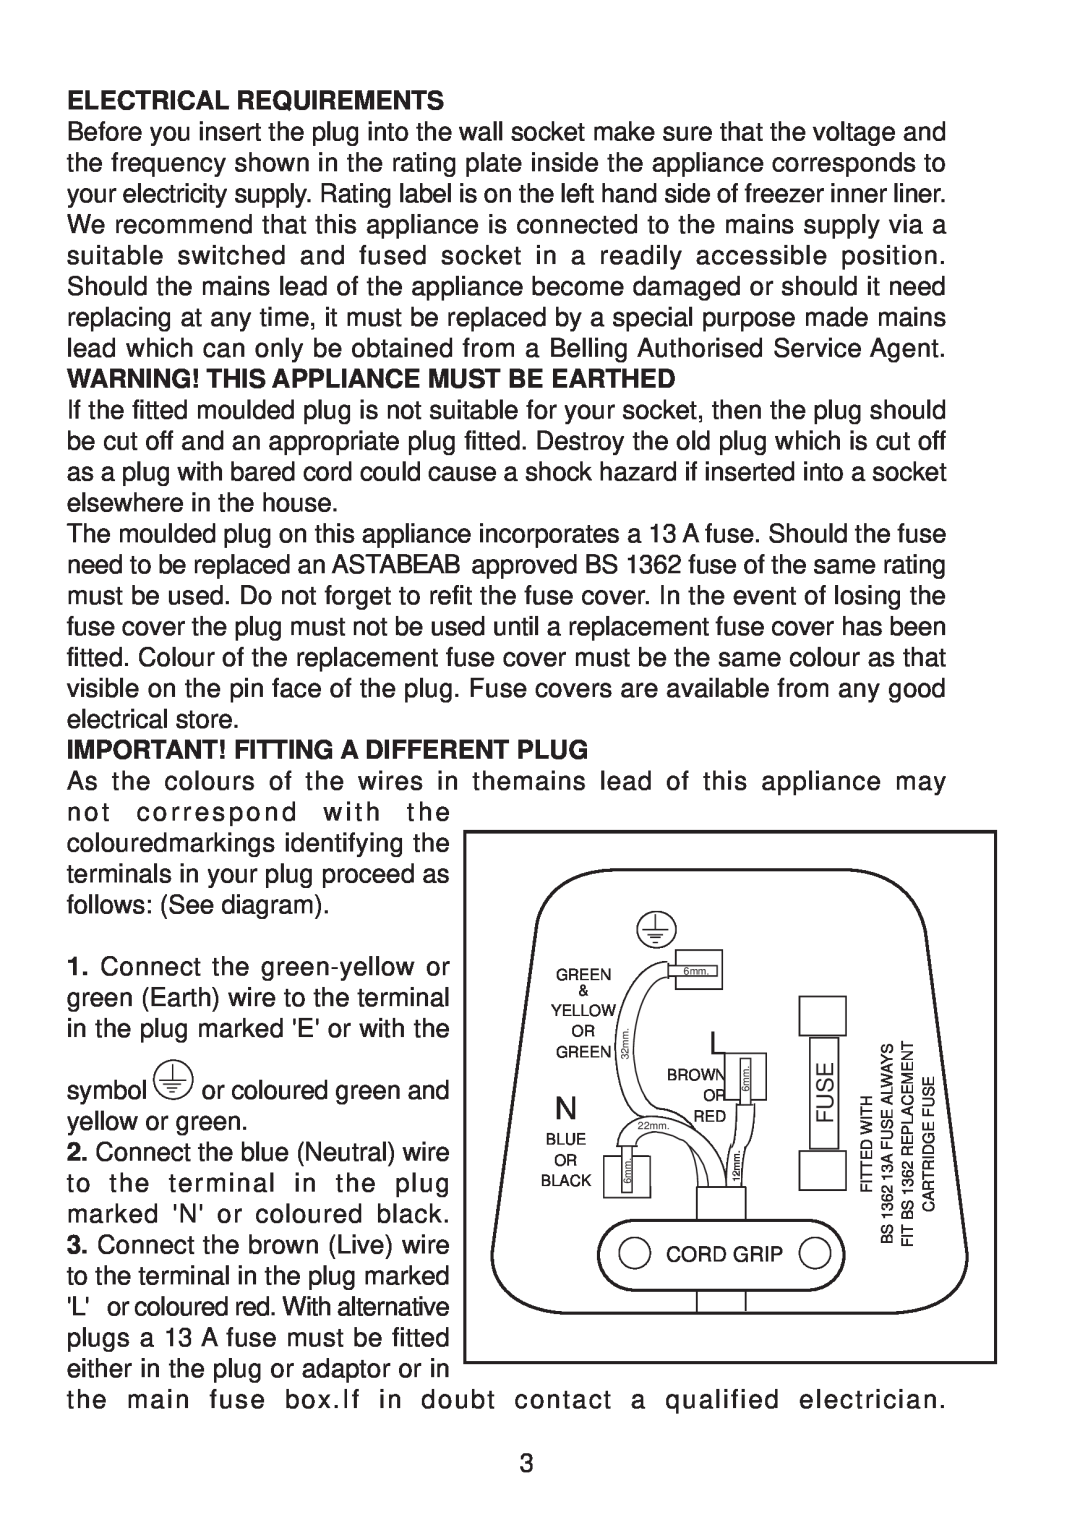 Glen Dimplex Home Appliances Ltd IFF5050FF manual Electrical Requirements, Warning! This Appliance Must Be Earthed 